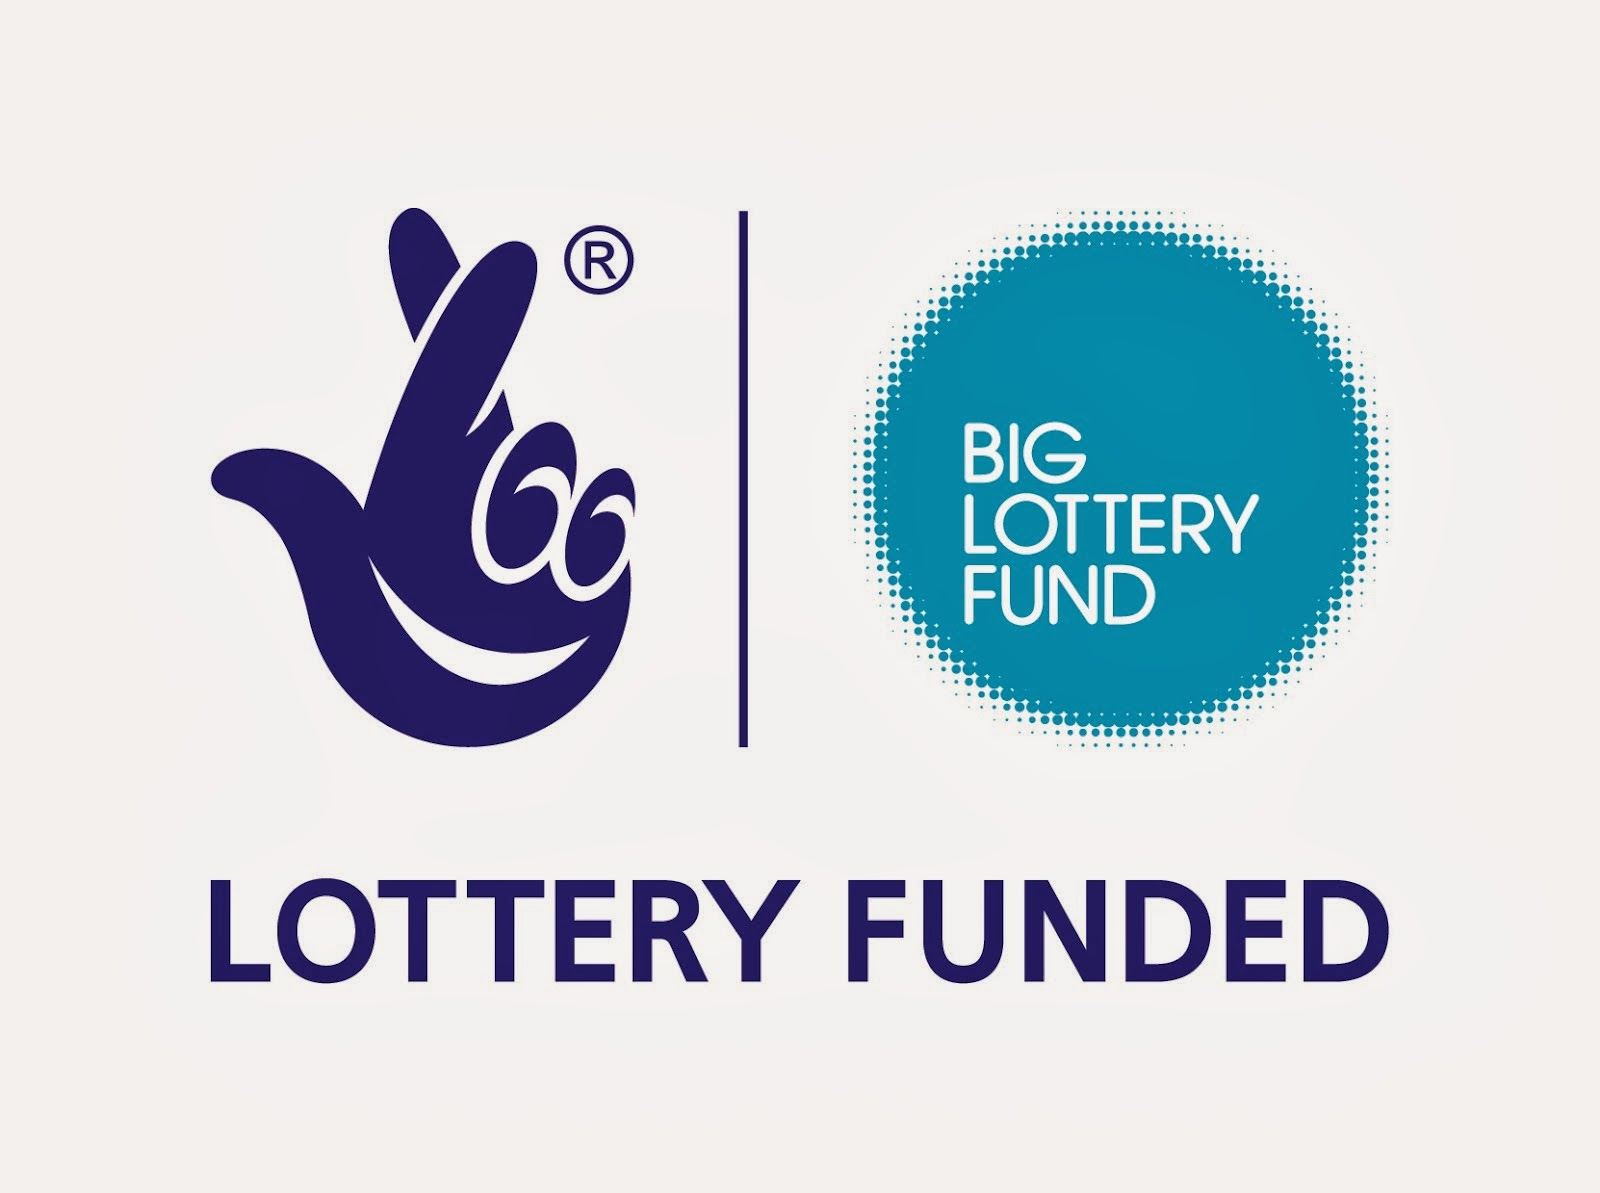 Funded by the National Lottery through the Big Lottery Fund